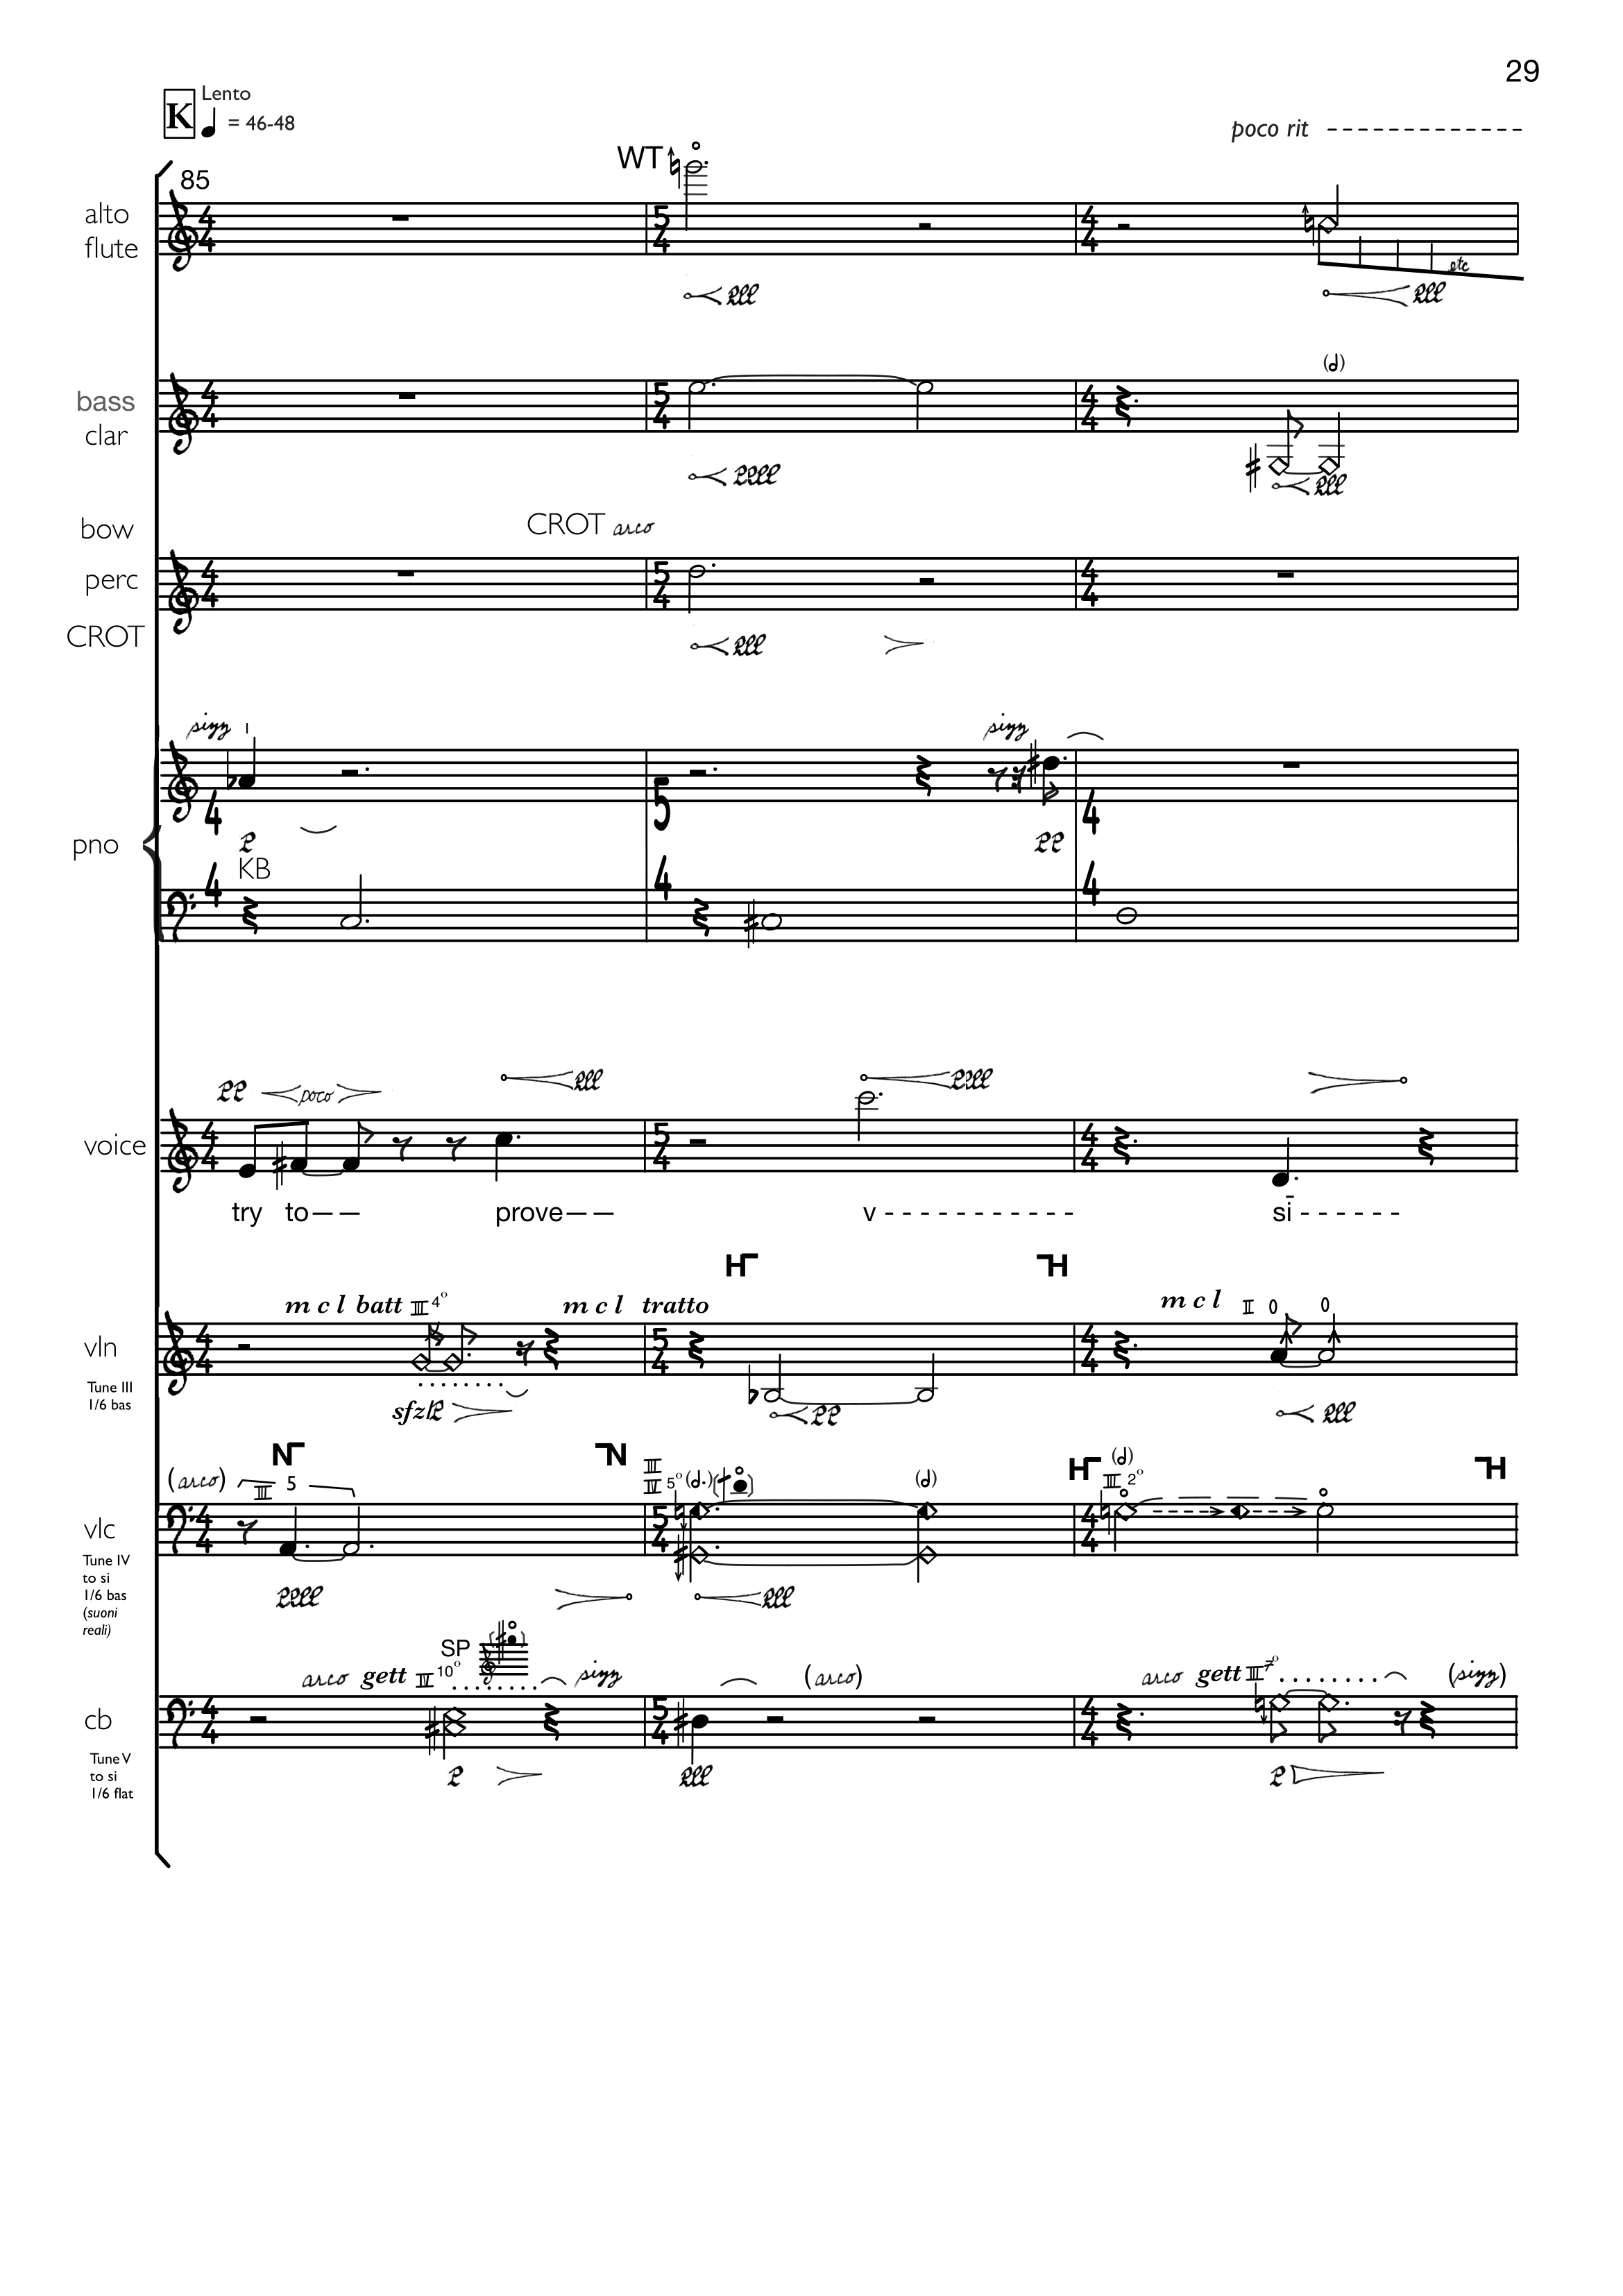 _AdasSong-score-2021version-29.png